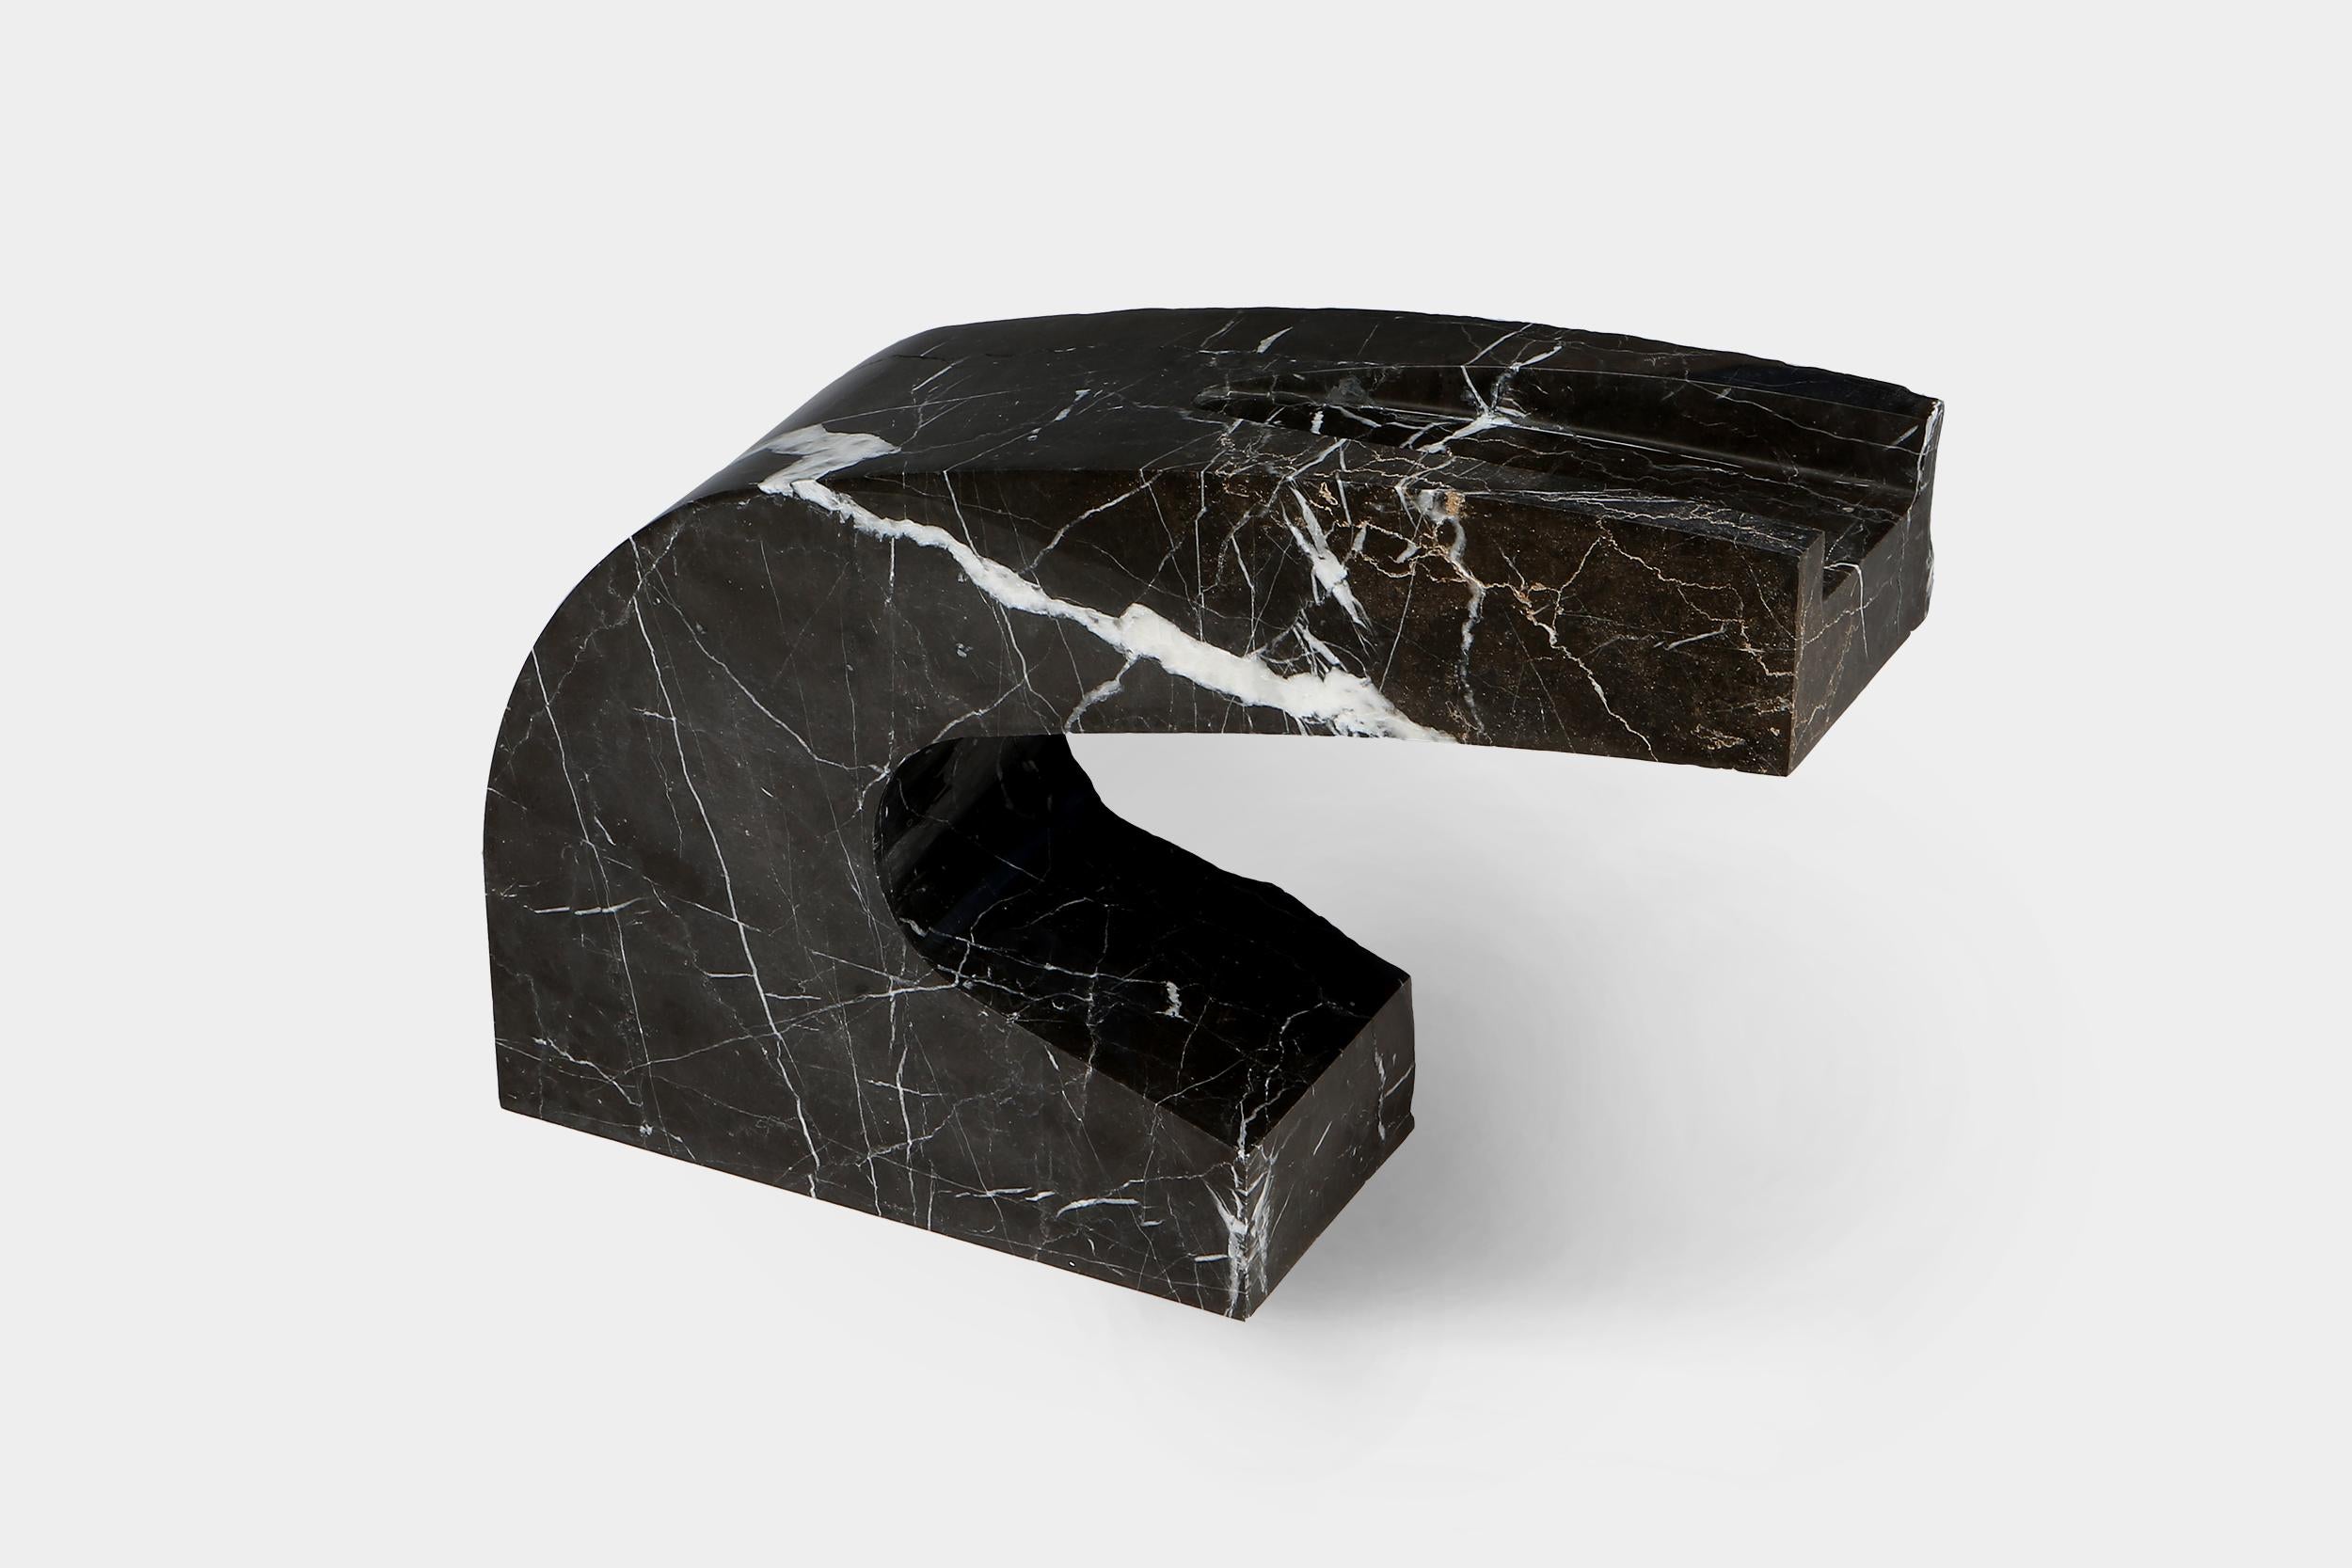 Found II side table No.4 by A Space
Dimensions: D46 x W25 x H58cm
Materials: Marble

Spontaneity, environmental awareness and the primeval nature of the materials are central themes explored in this collection, which focuses on the power of the